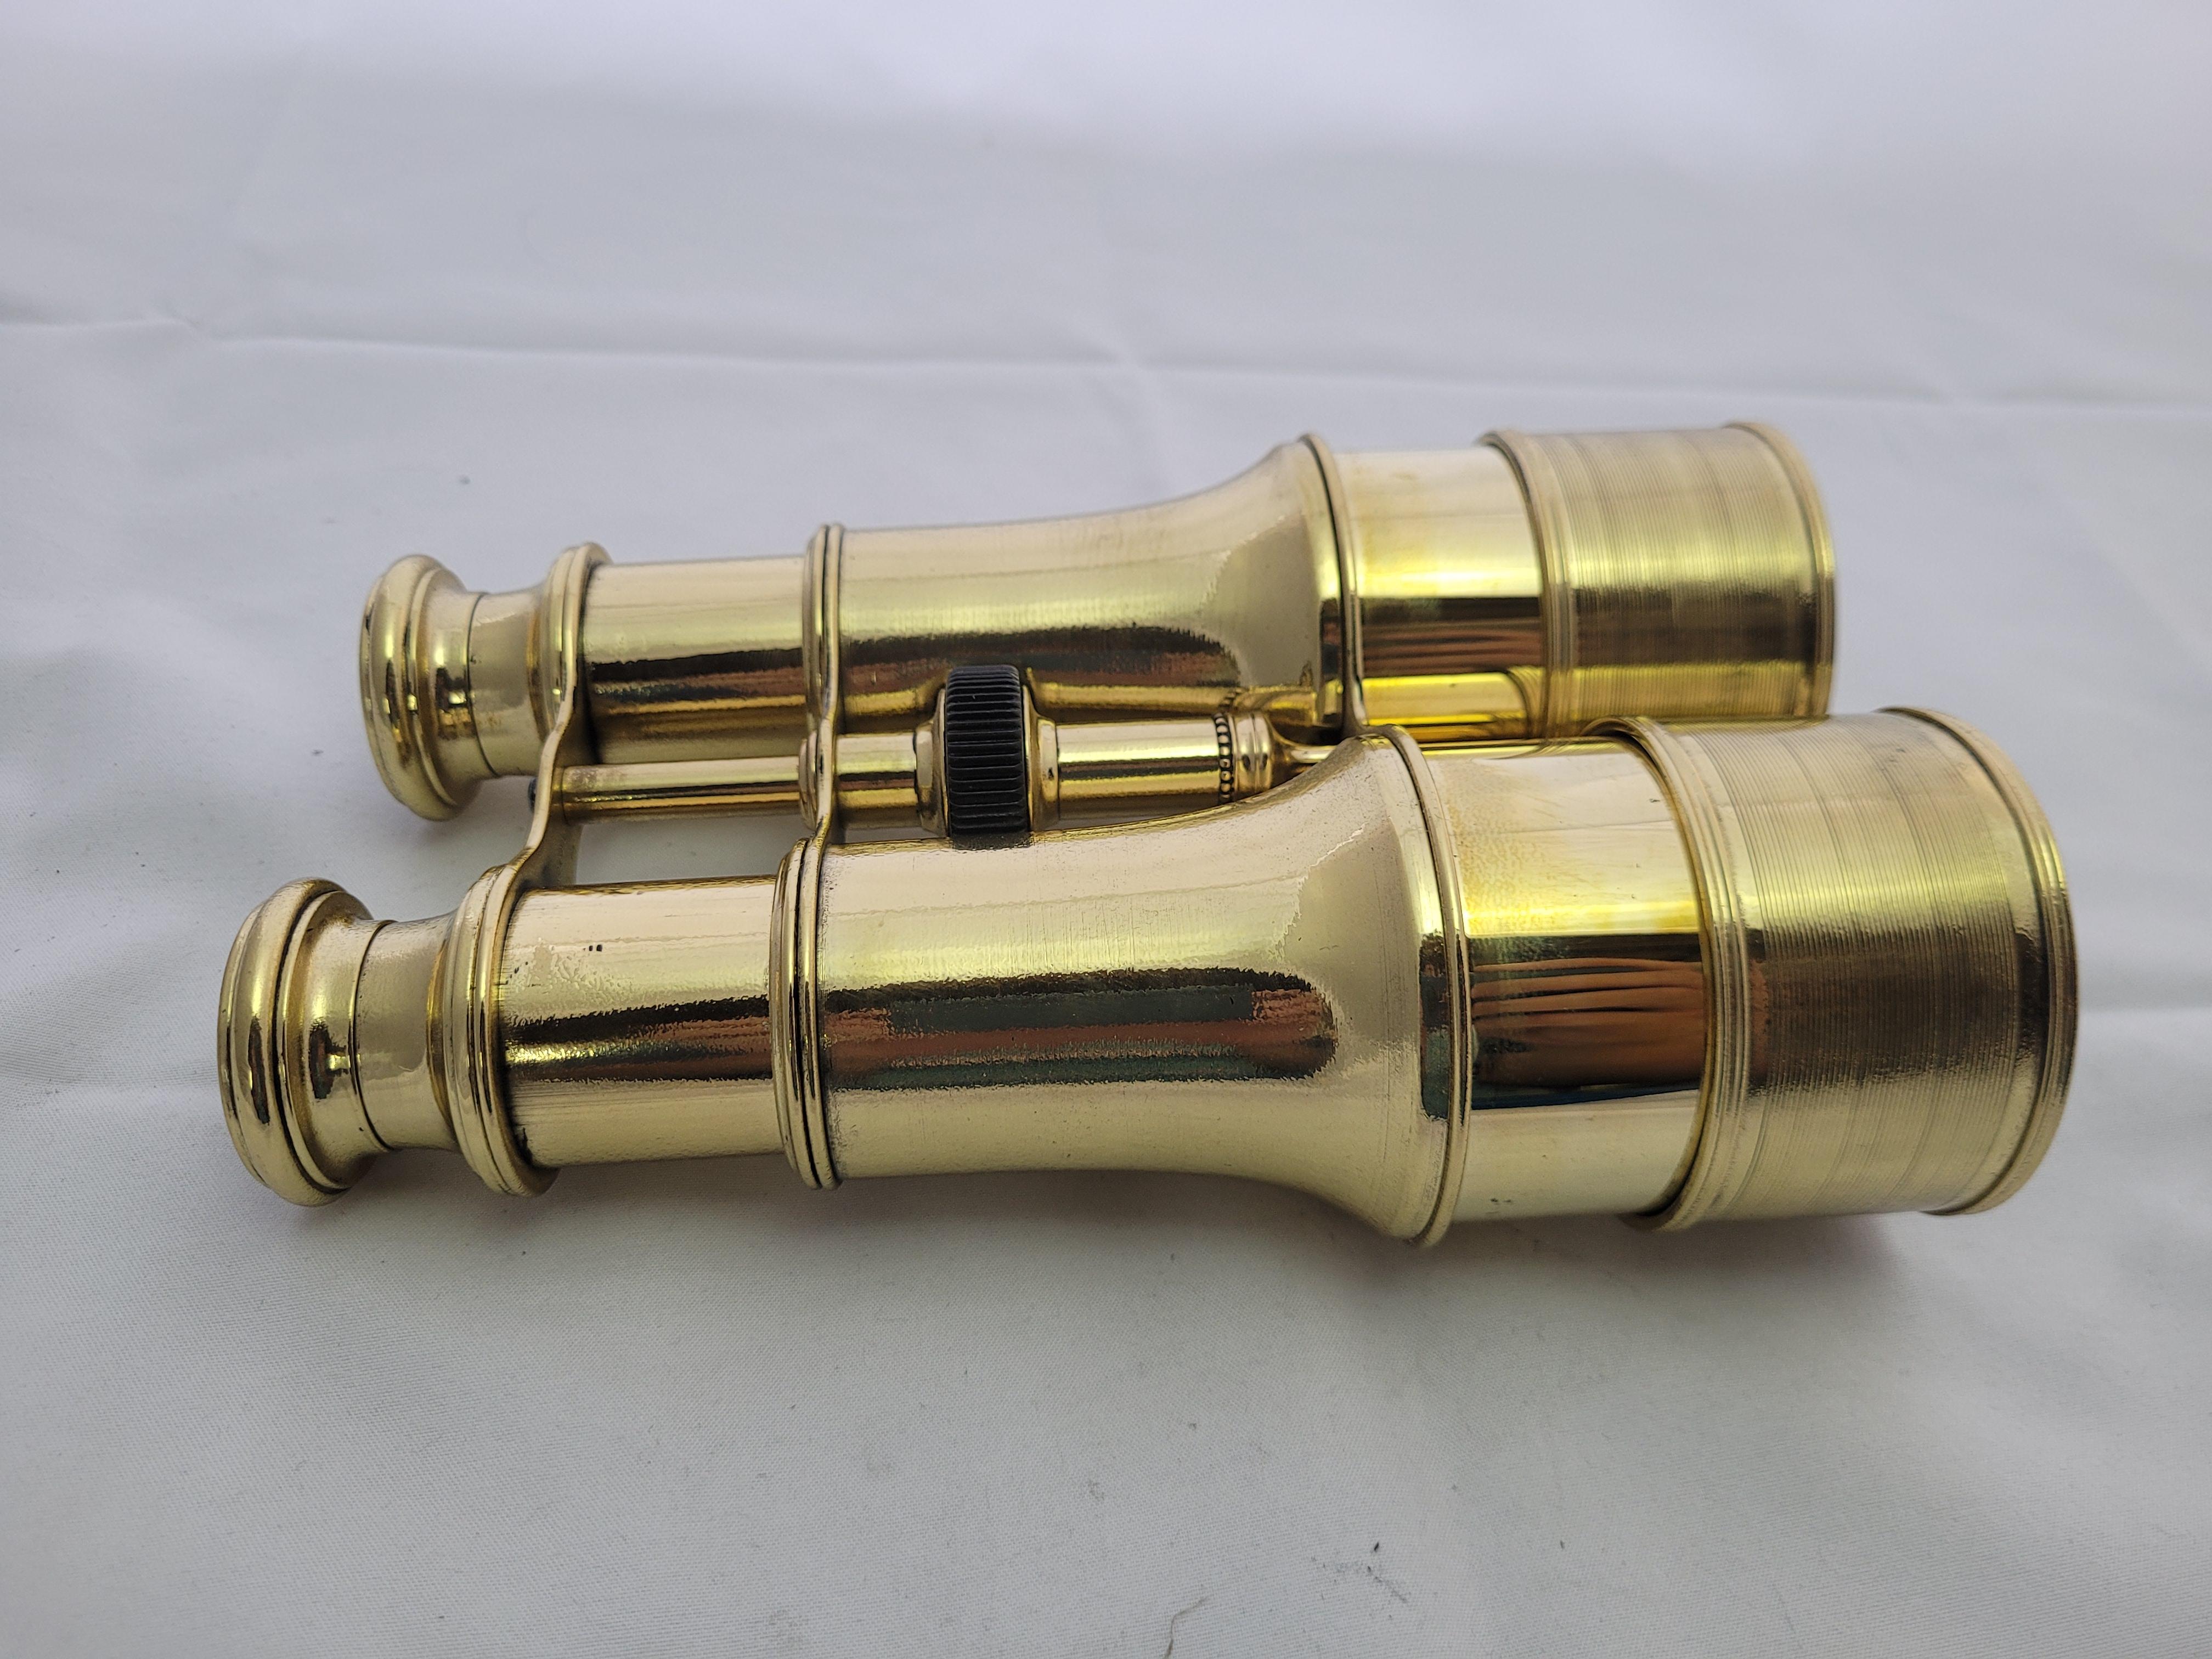 French Yachting Binoculars by Lemaire Fabt, Paris 4